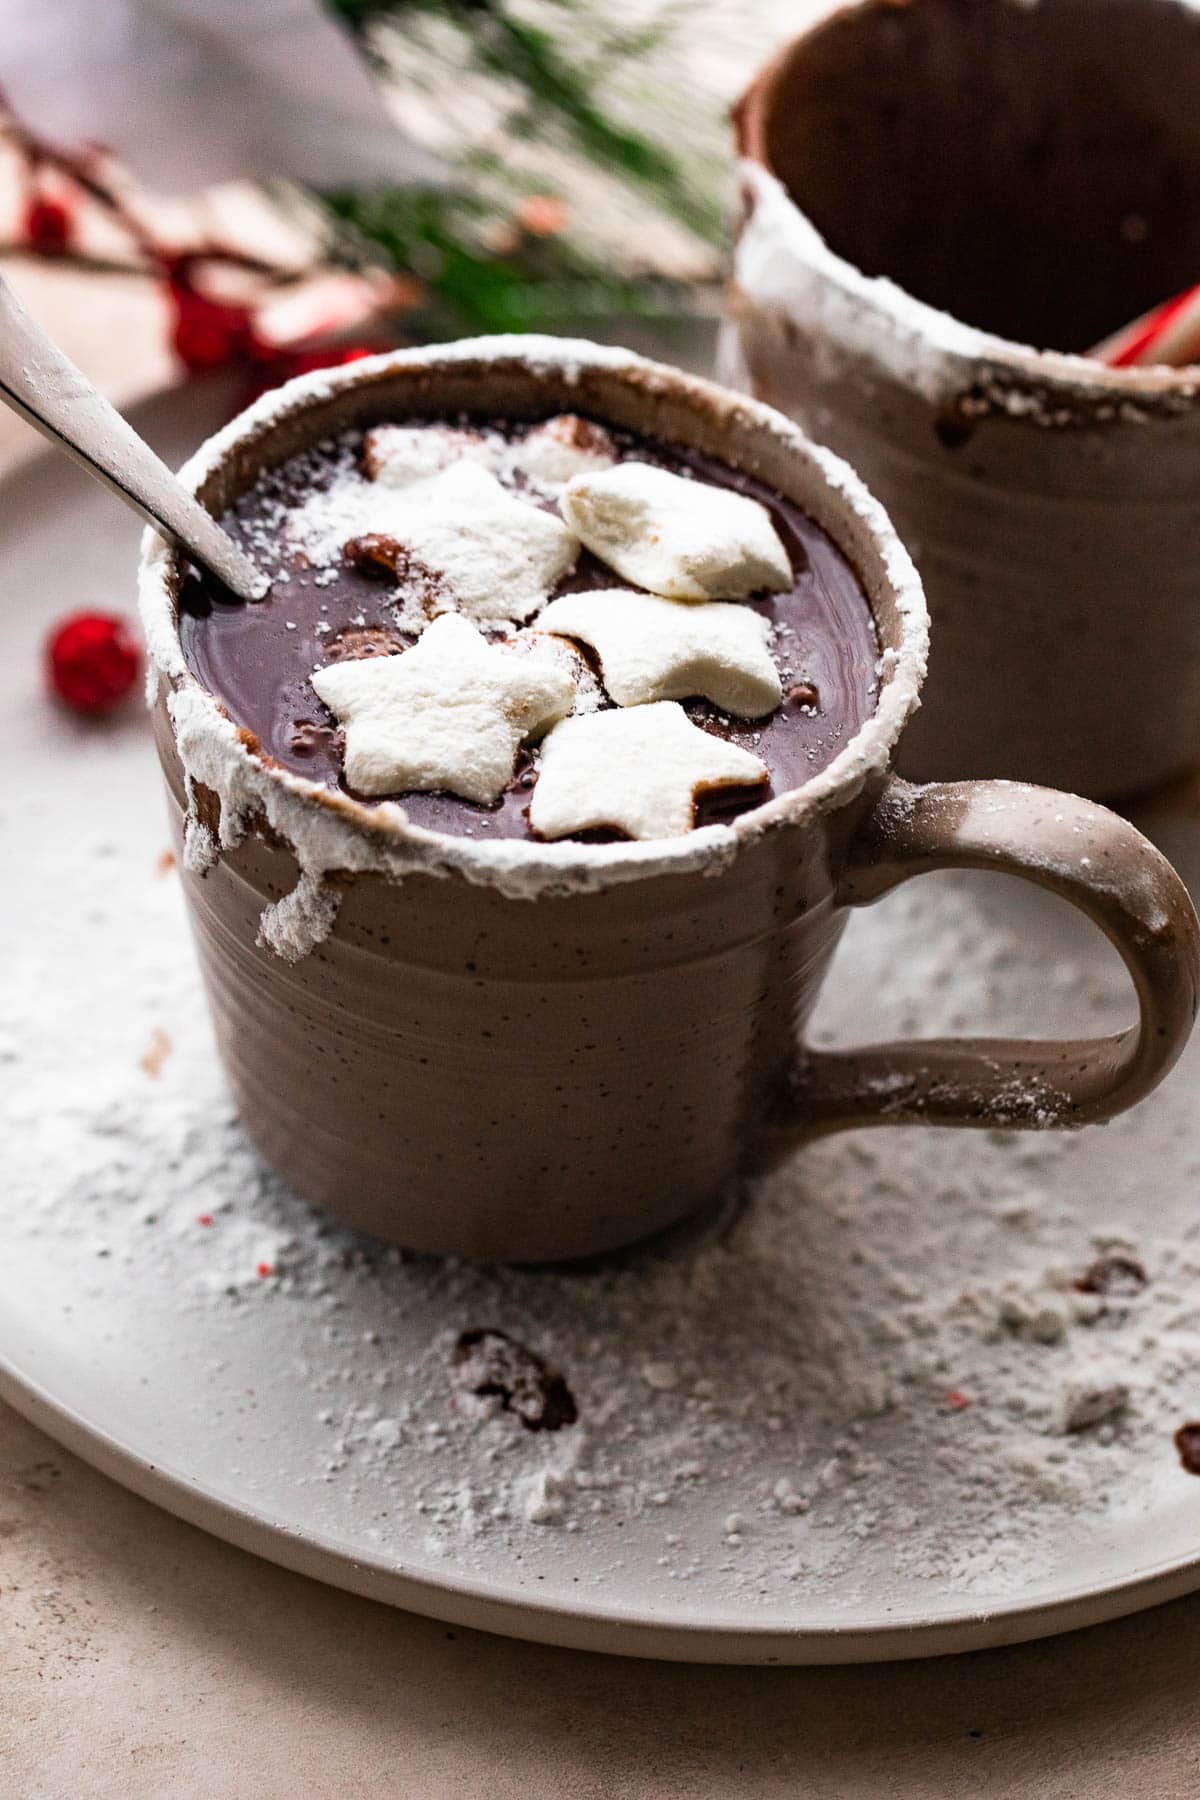 Hot Chocolate served in a mug and topped with star-shaped marshmallows.